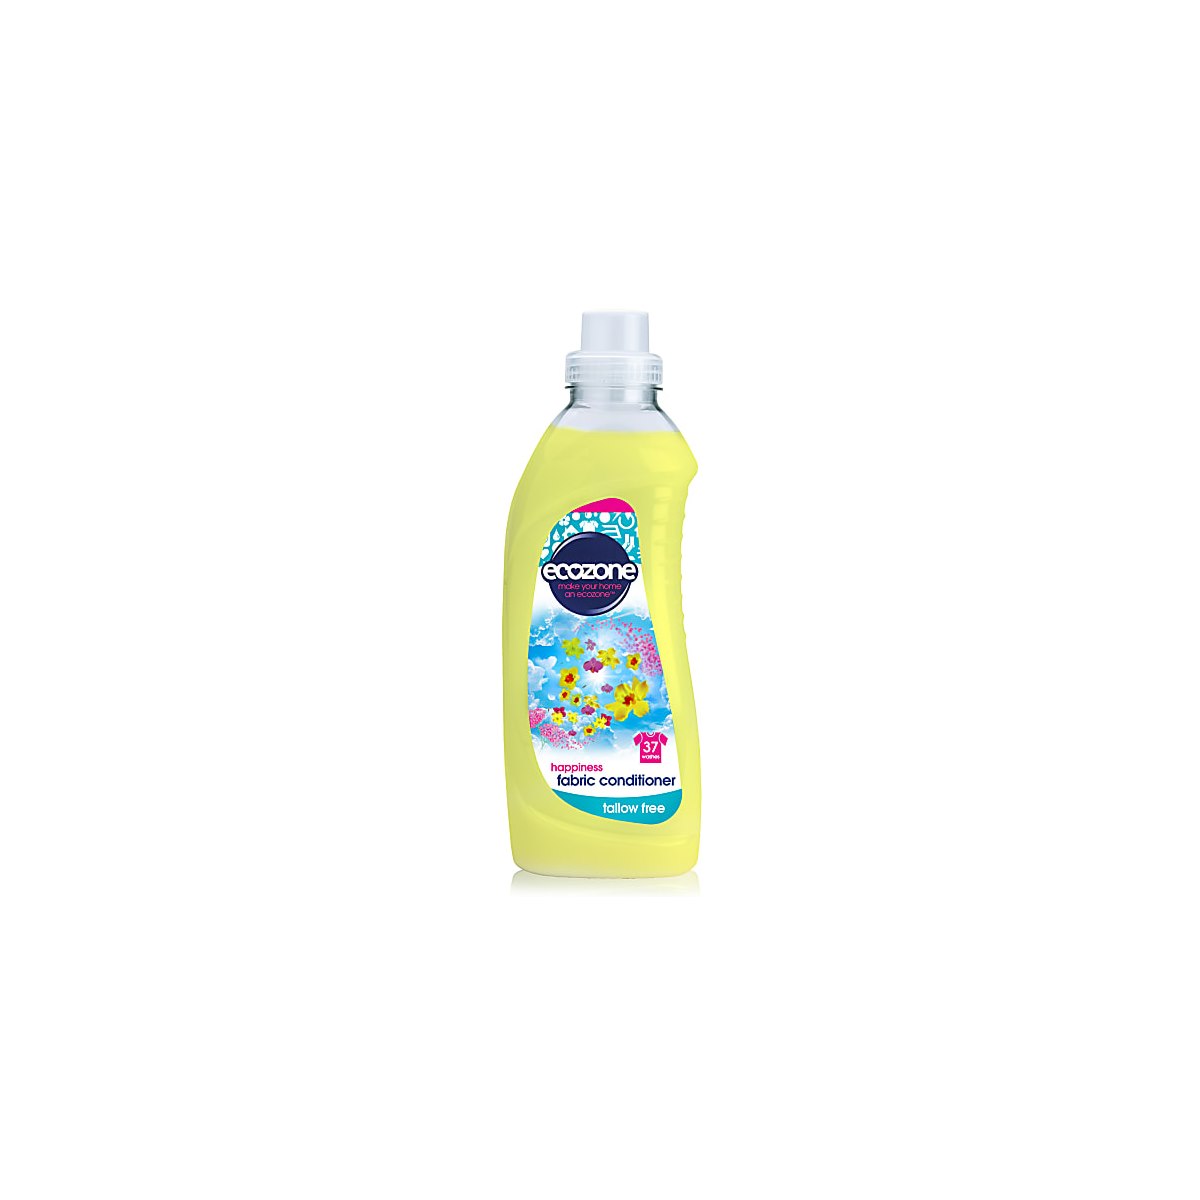 Ecozone Happiness Fabric Conditioner Tallow Free 1 Litre.